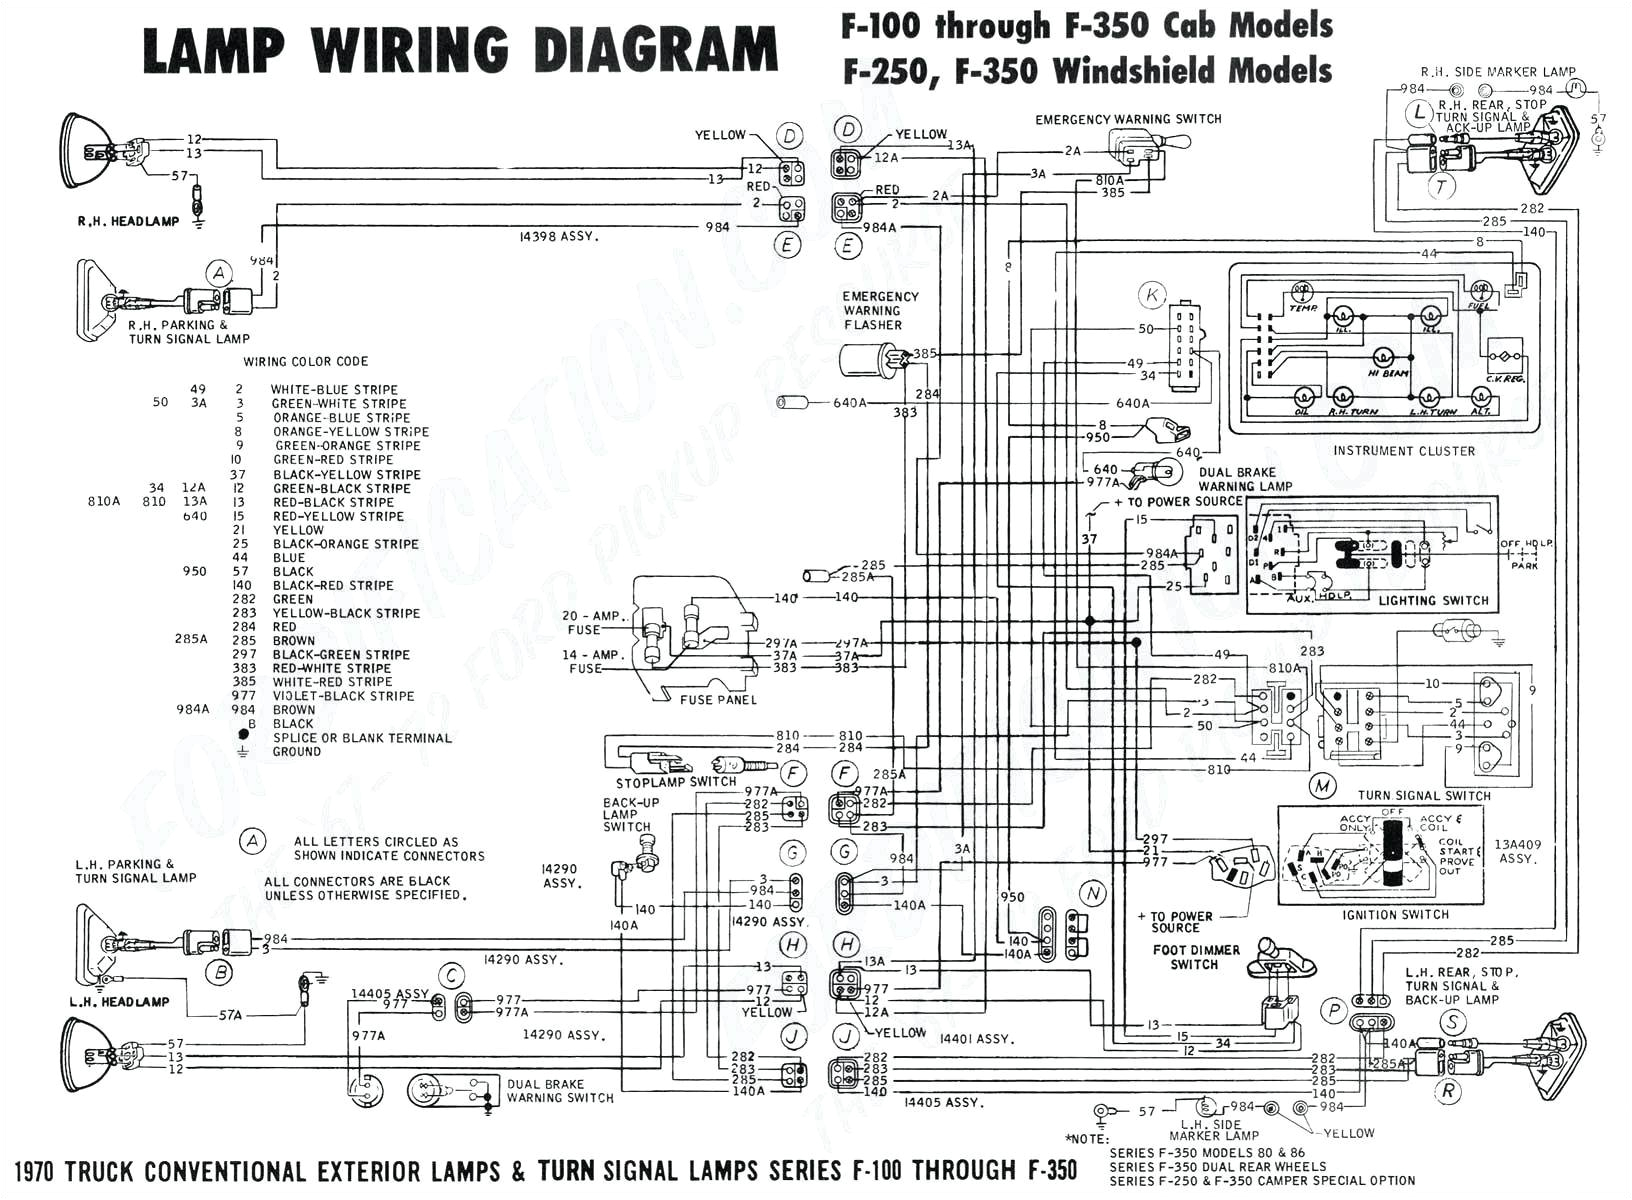 generator wiring harness free download wiring diagram long golf cart wiring harness for horn free download